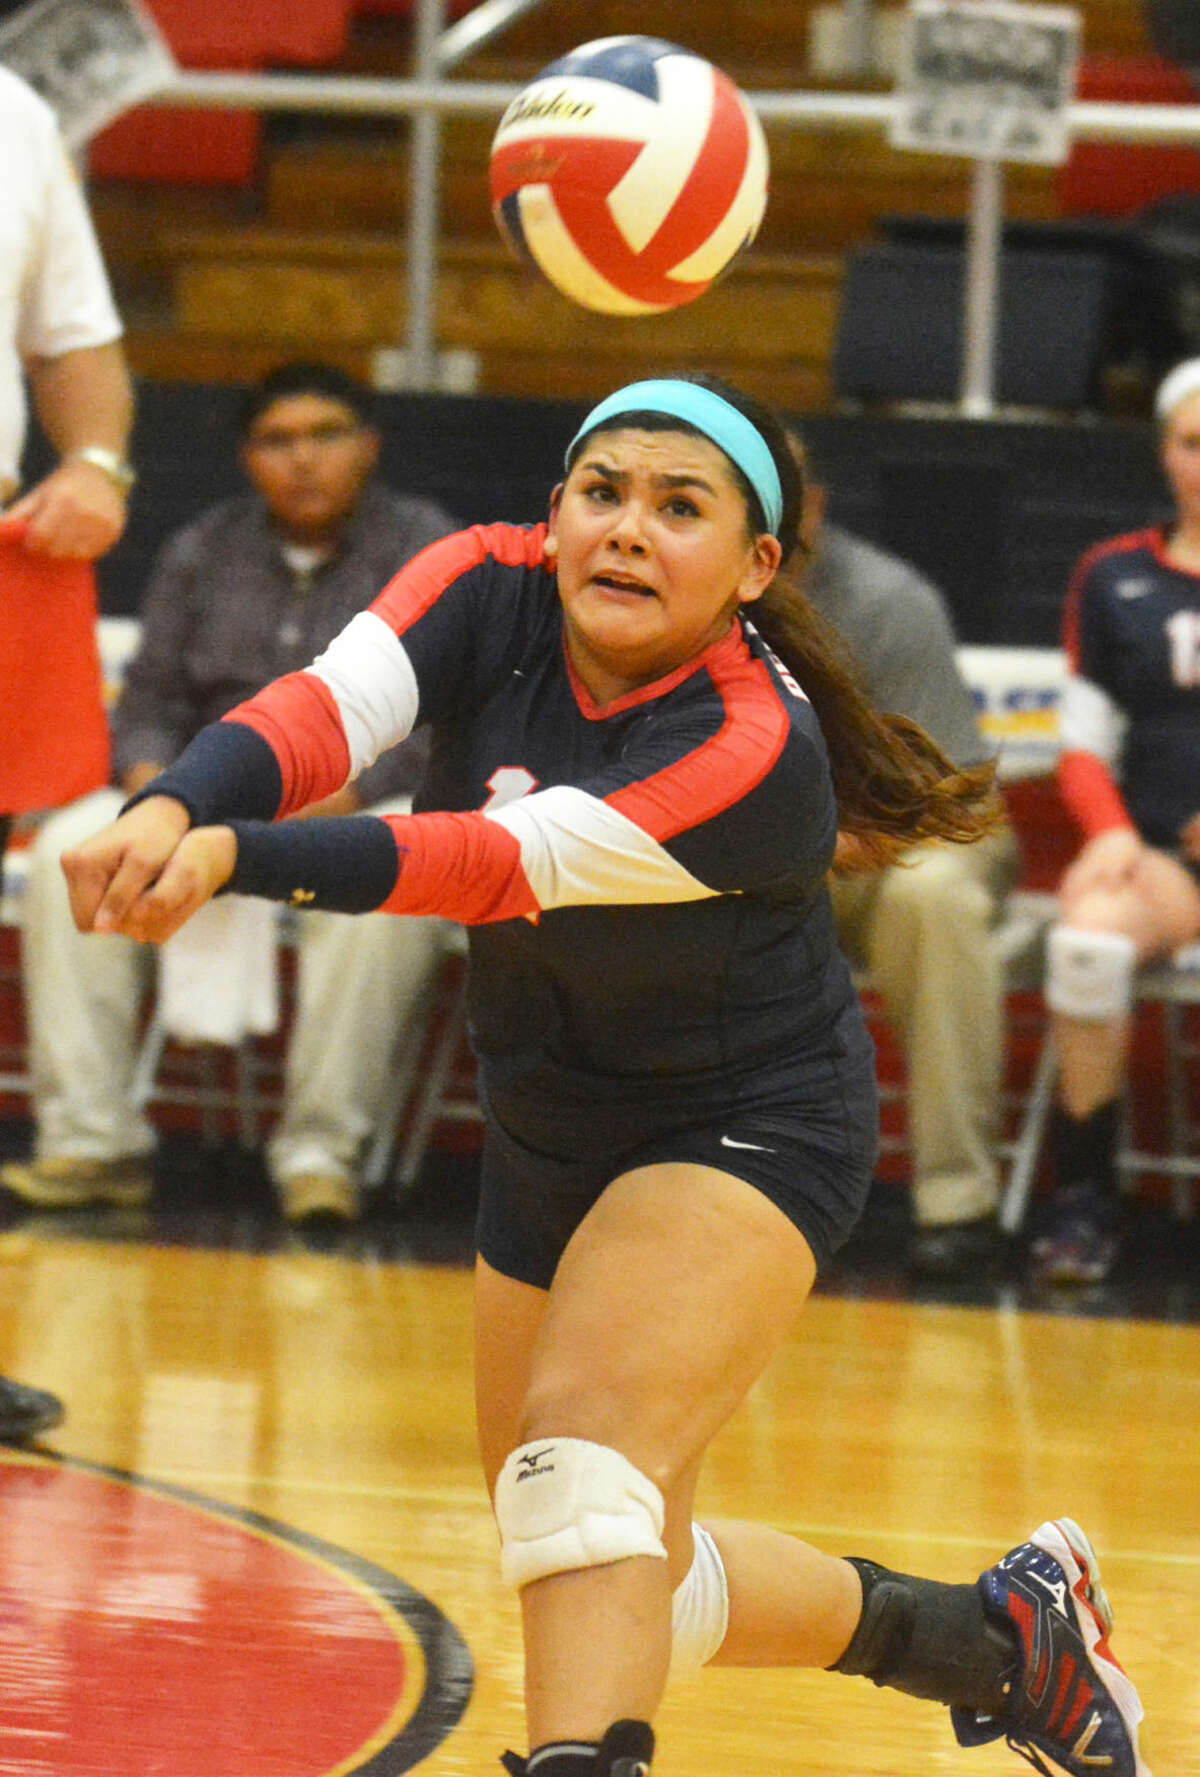 Plainview's Jackie Perez lunges to dig out a Lubbock High hit during a District 4-5A volleyball match at the Dog House Tuesday night. Perez had 22 digs, some of the spectacular, diving variety to keep the ball alive.